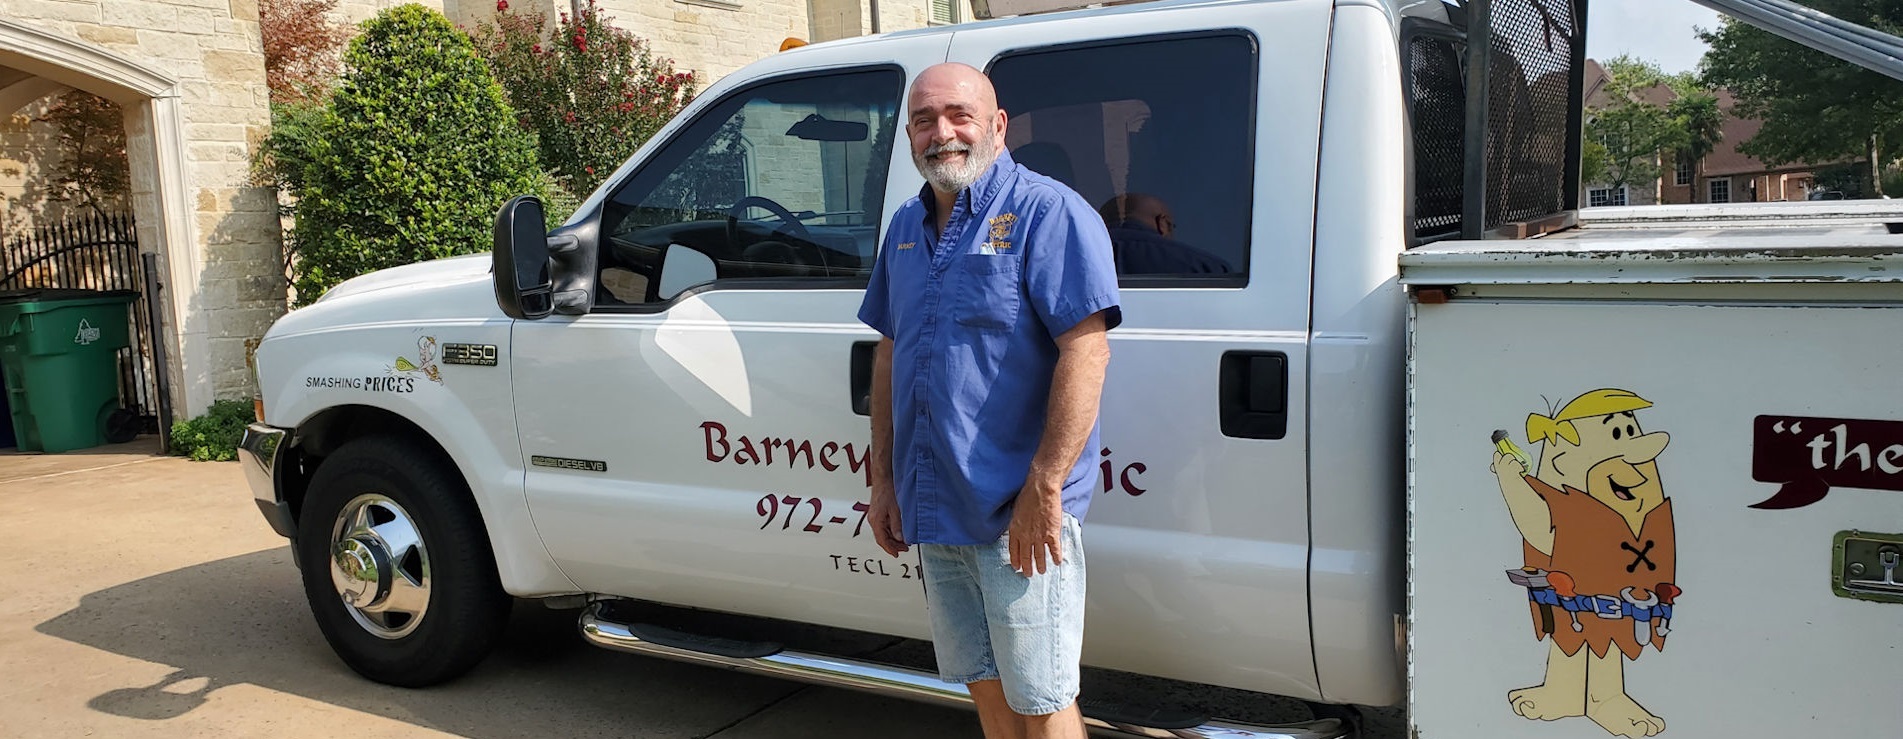 Barney's Electric Master Electrician Rockwall Texas - Electrical Services Residential Electrician Commercial Electrician Dallas Garland Mesquite Plano Richardson Rockwall Rowlett